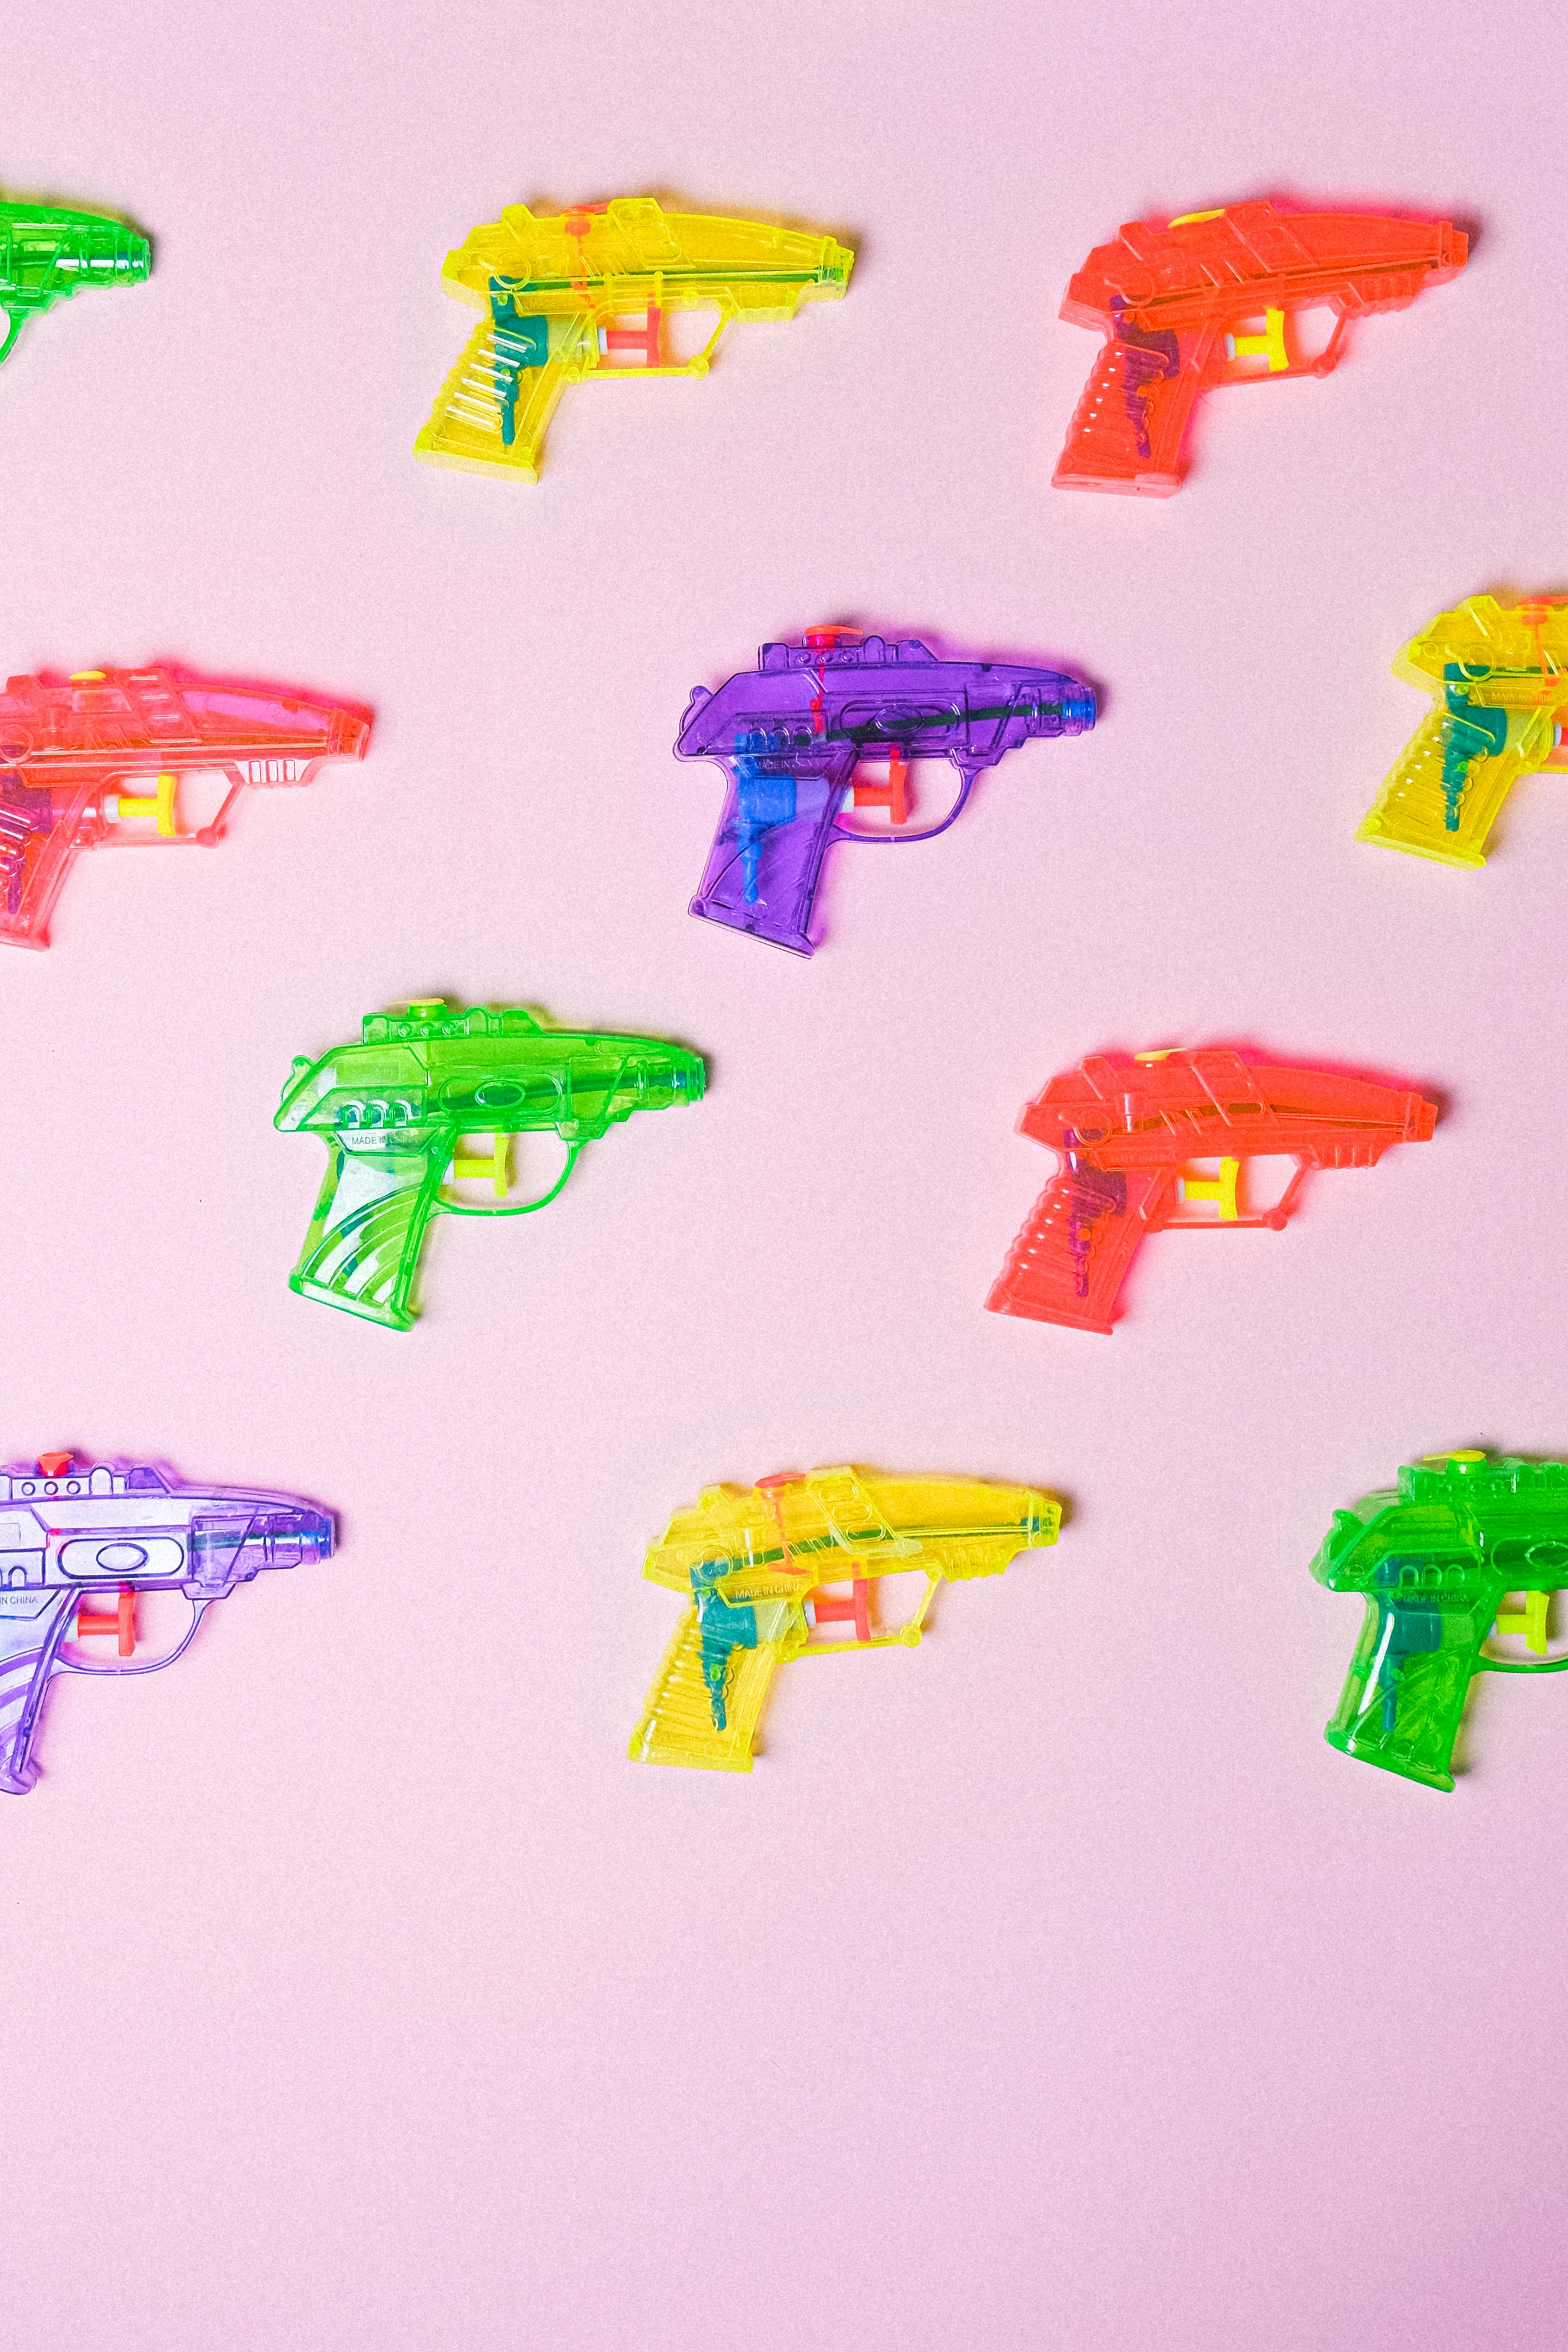 colorful guns in rows on pink surface